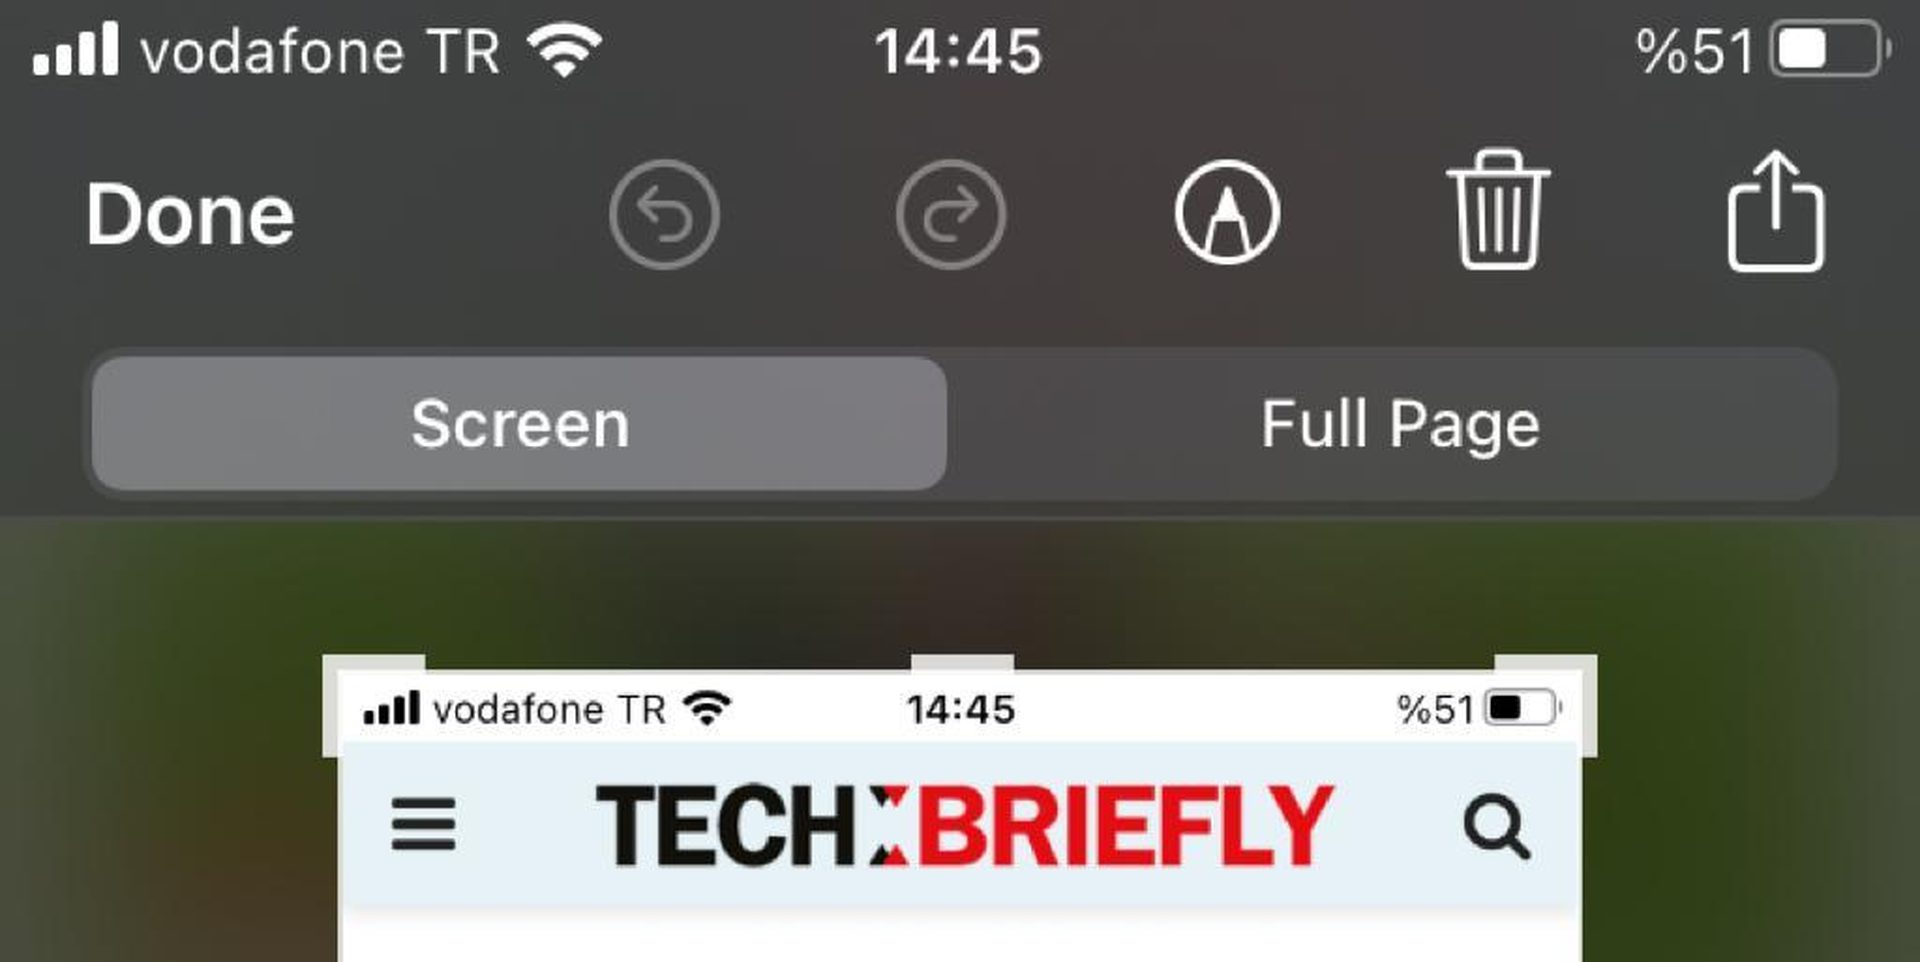 How to screenshot full page on iPhone